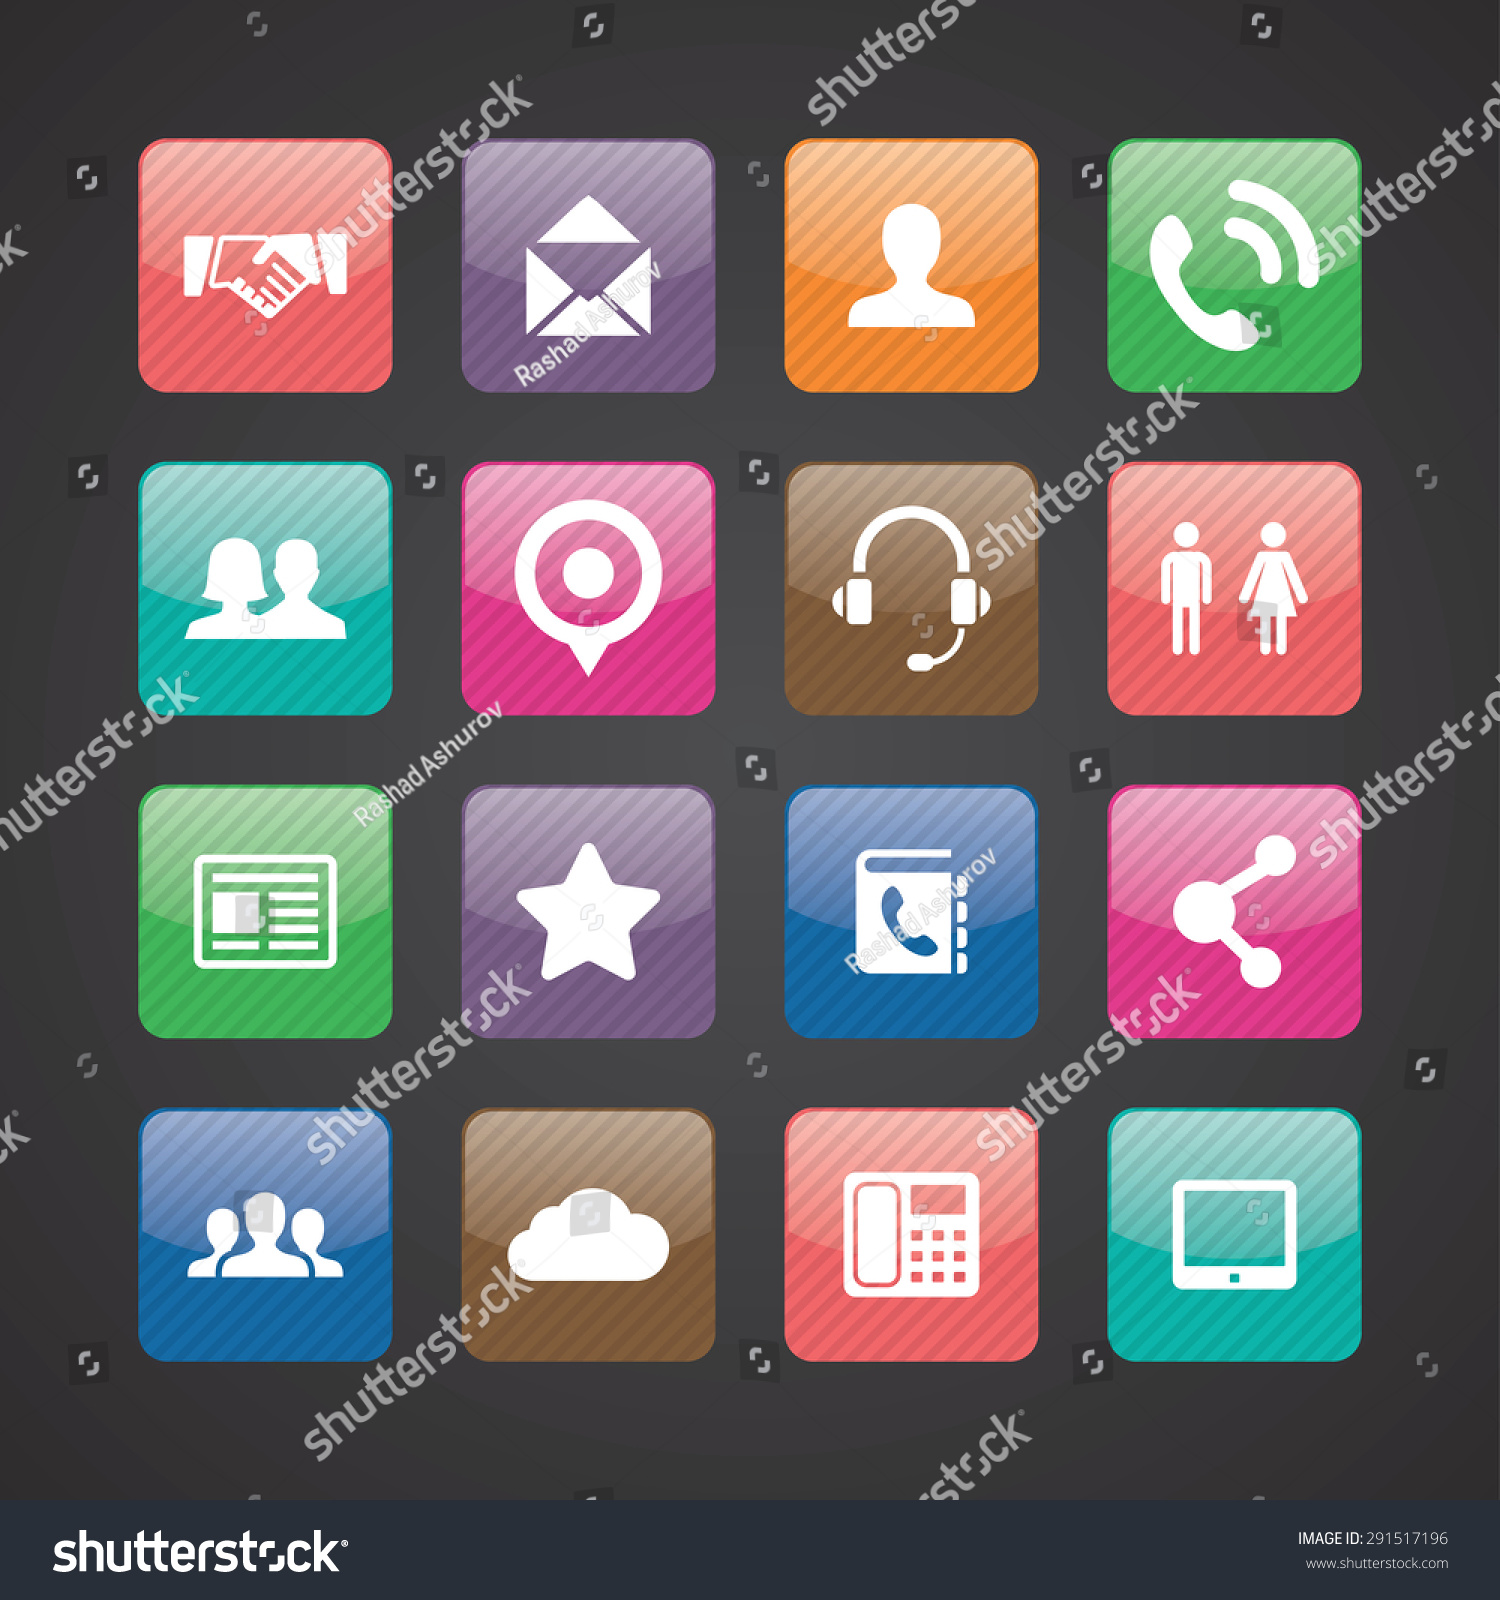 Communication Icons Universal Set For Web And Royalty Free Stock Vector 291517196 